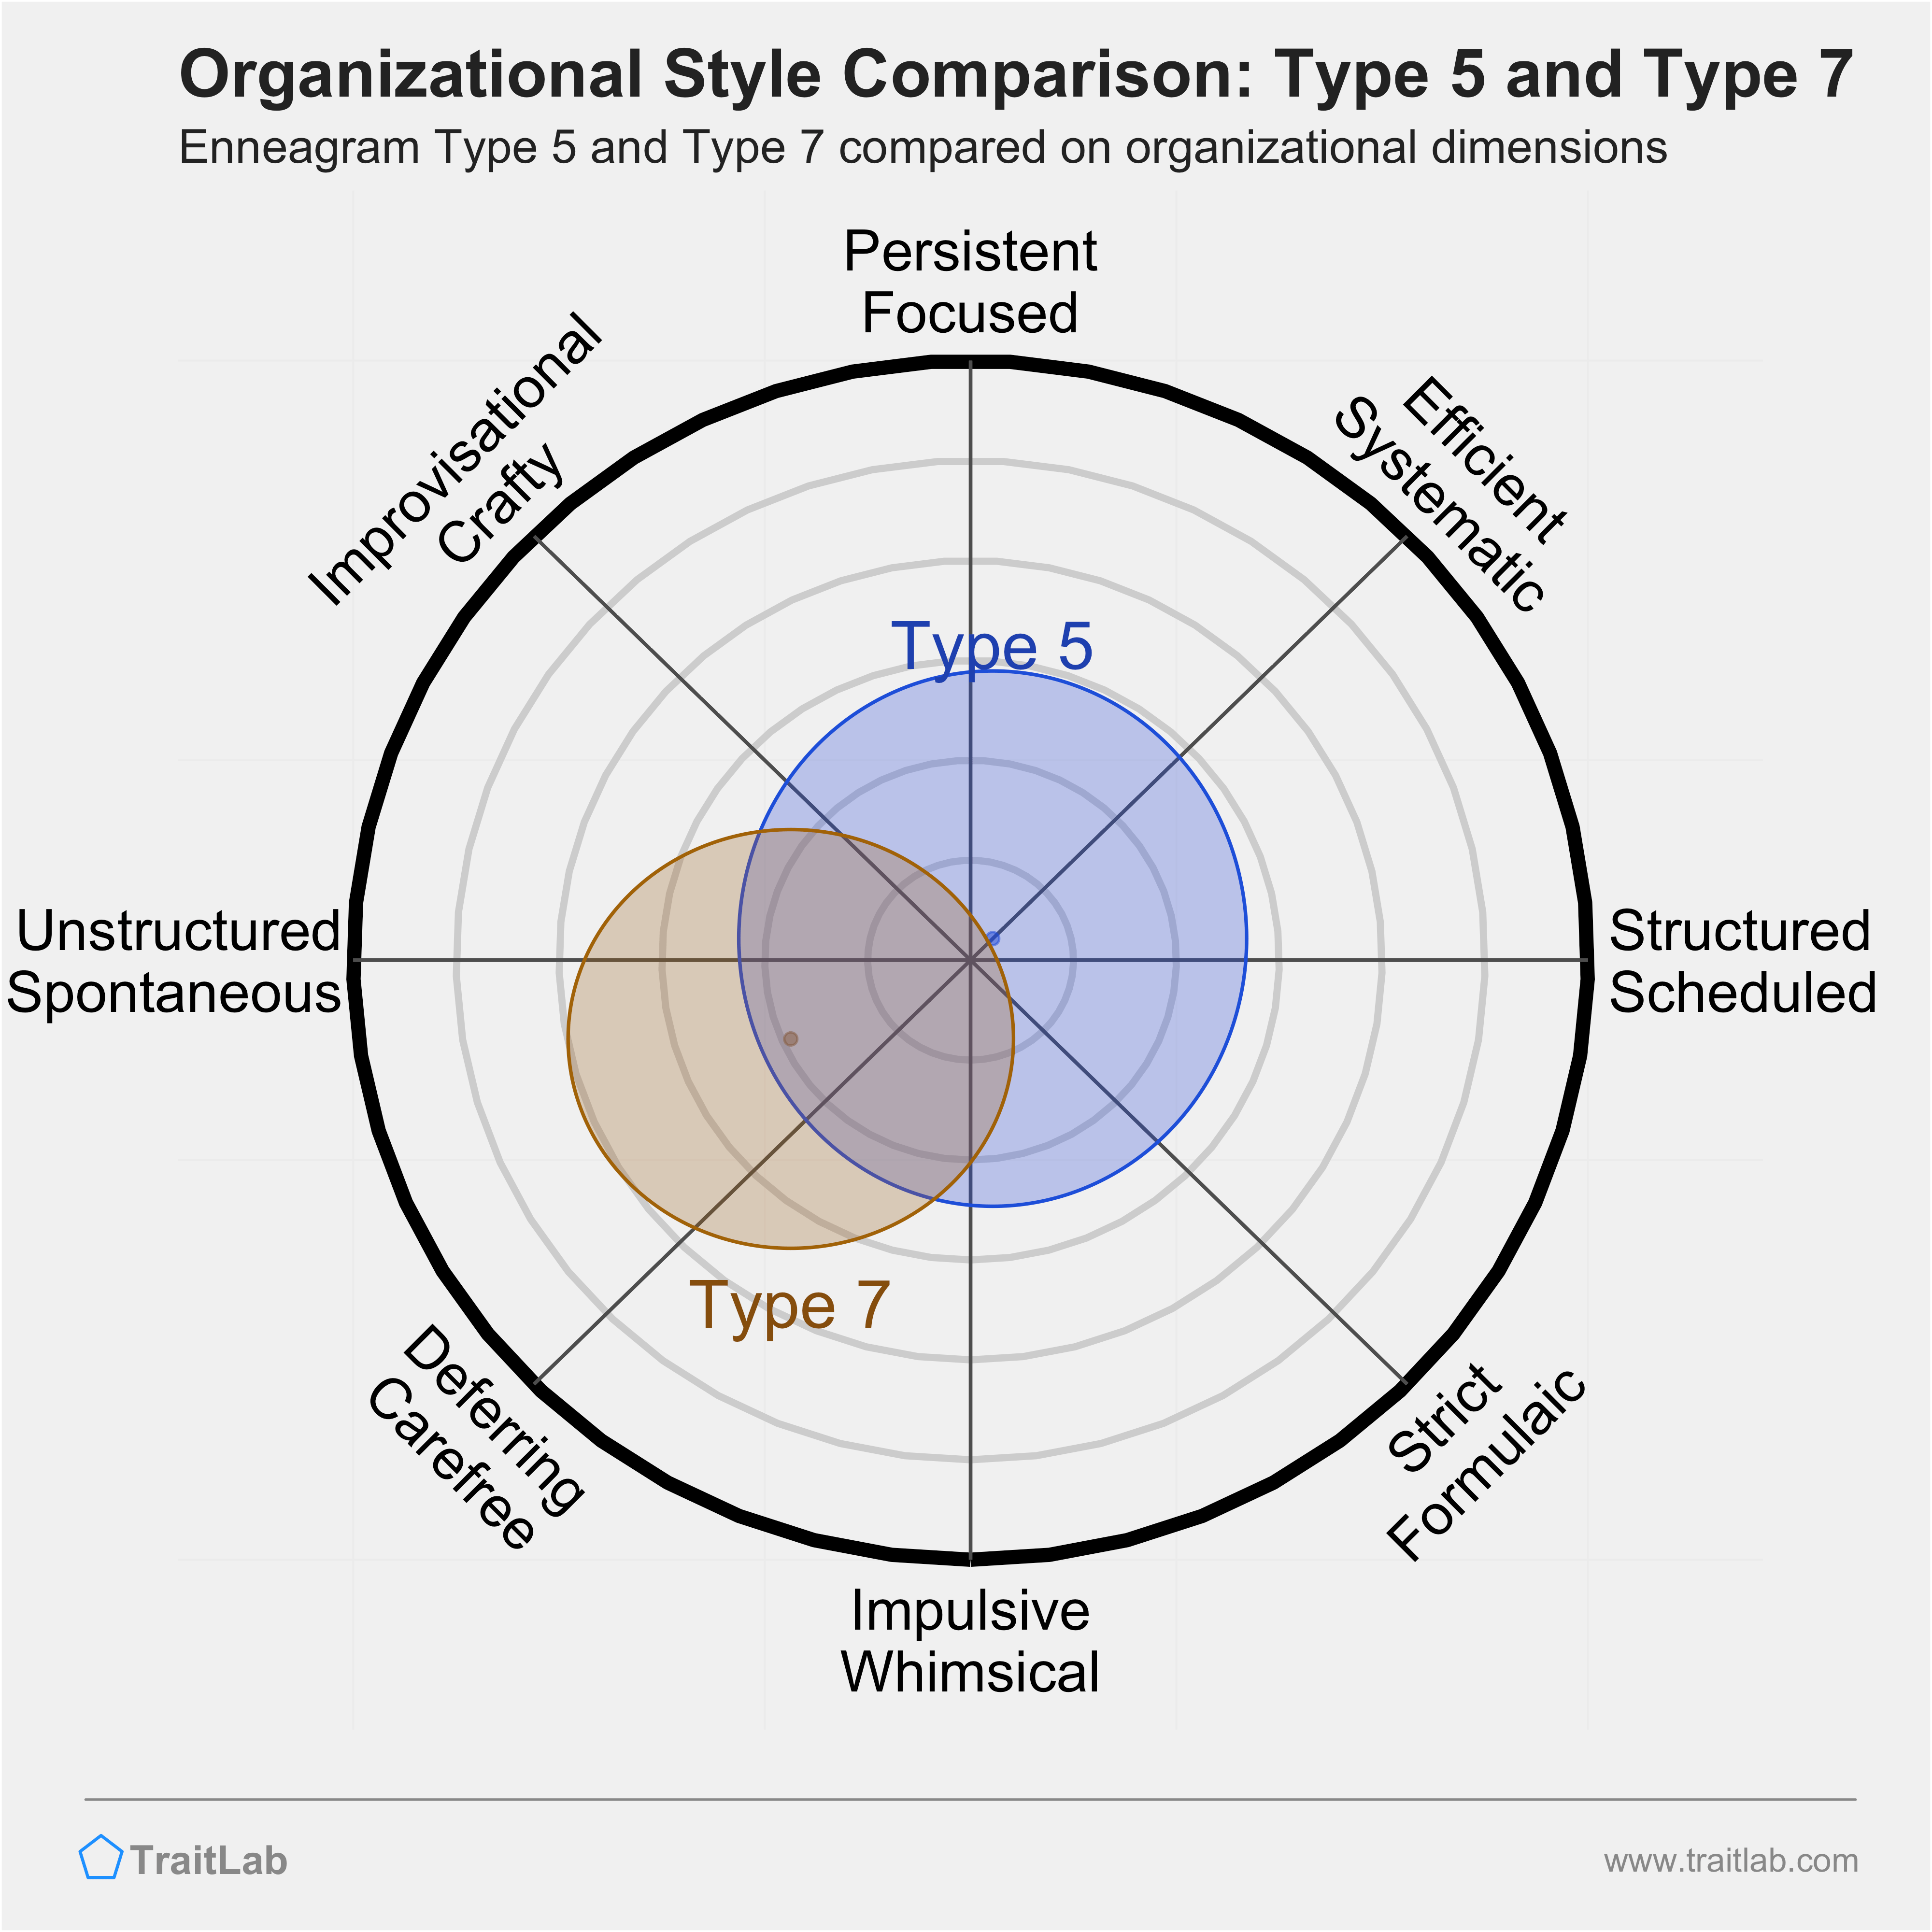 Type 5 and Type 7 comparison across organizational dimensions